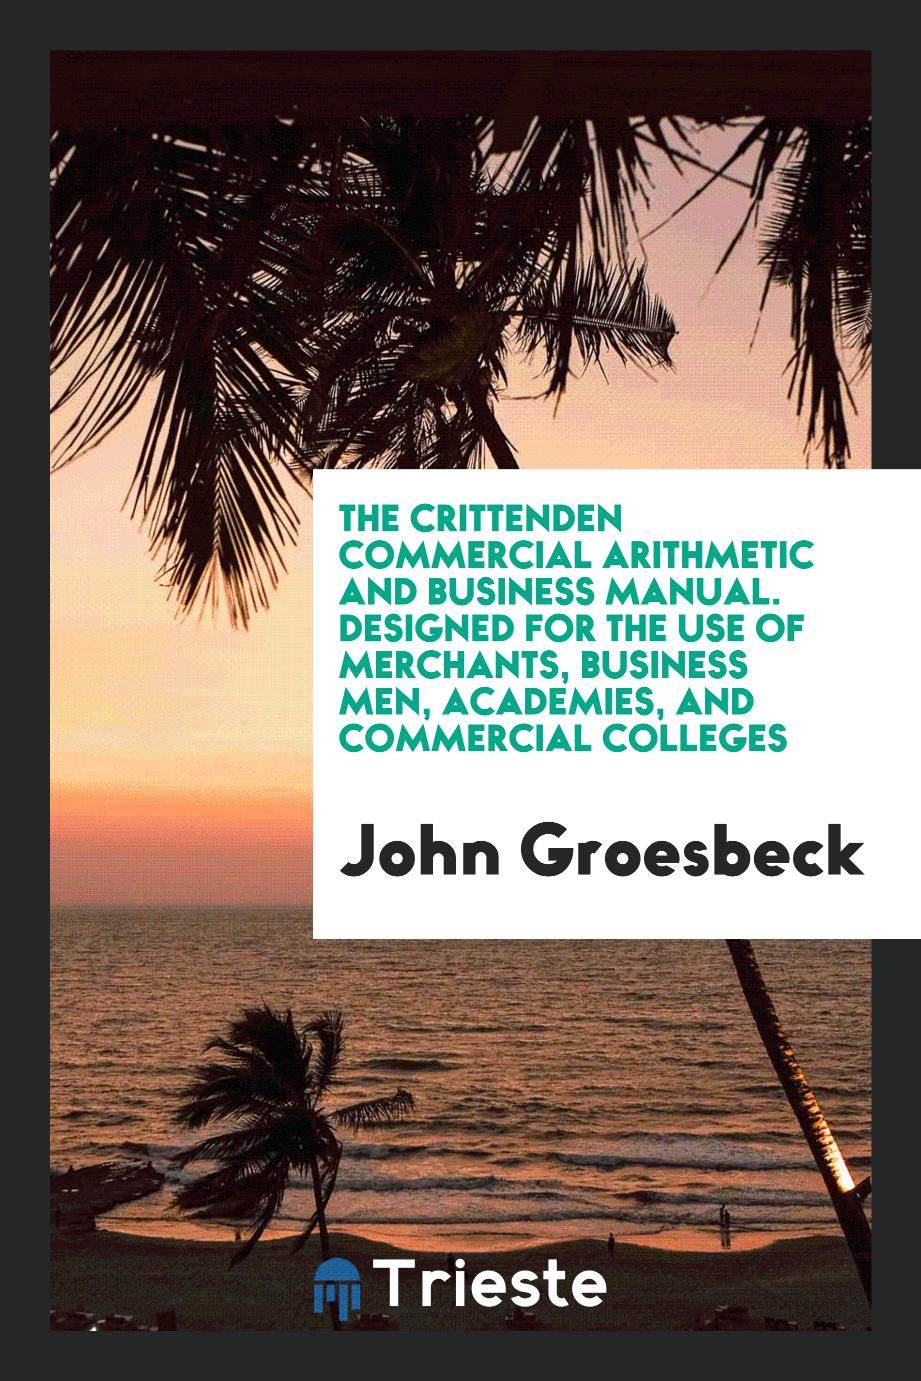 The Crittenden commercial arithmetic and business manual. Designed for the use of merchants, business men, academies, and commercial colleges